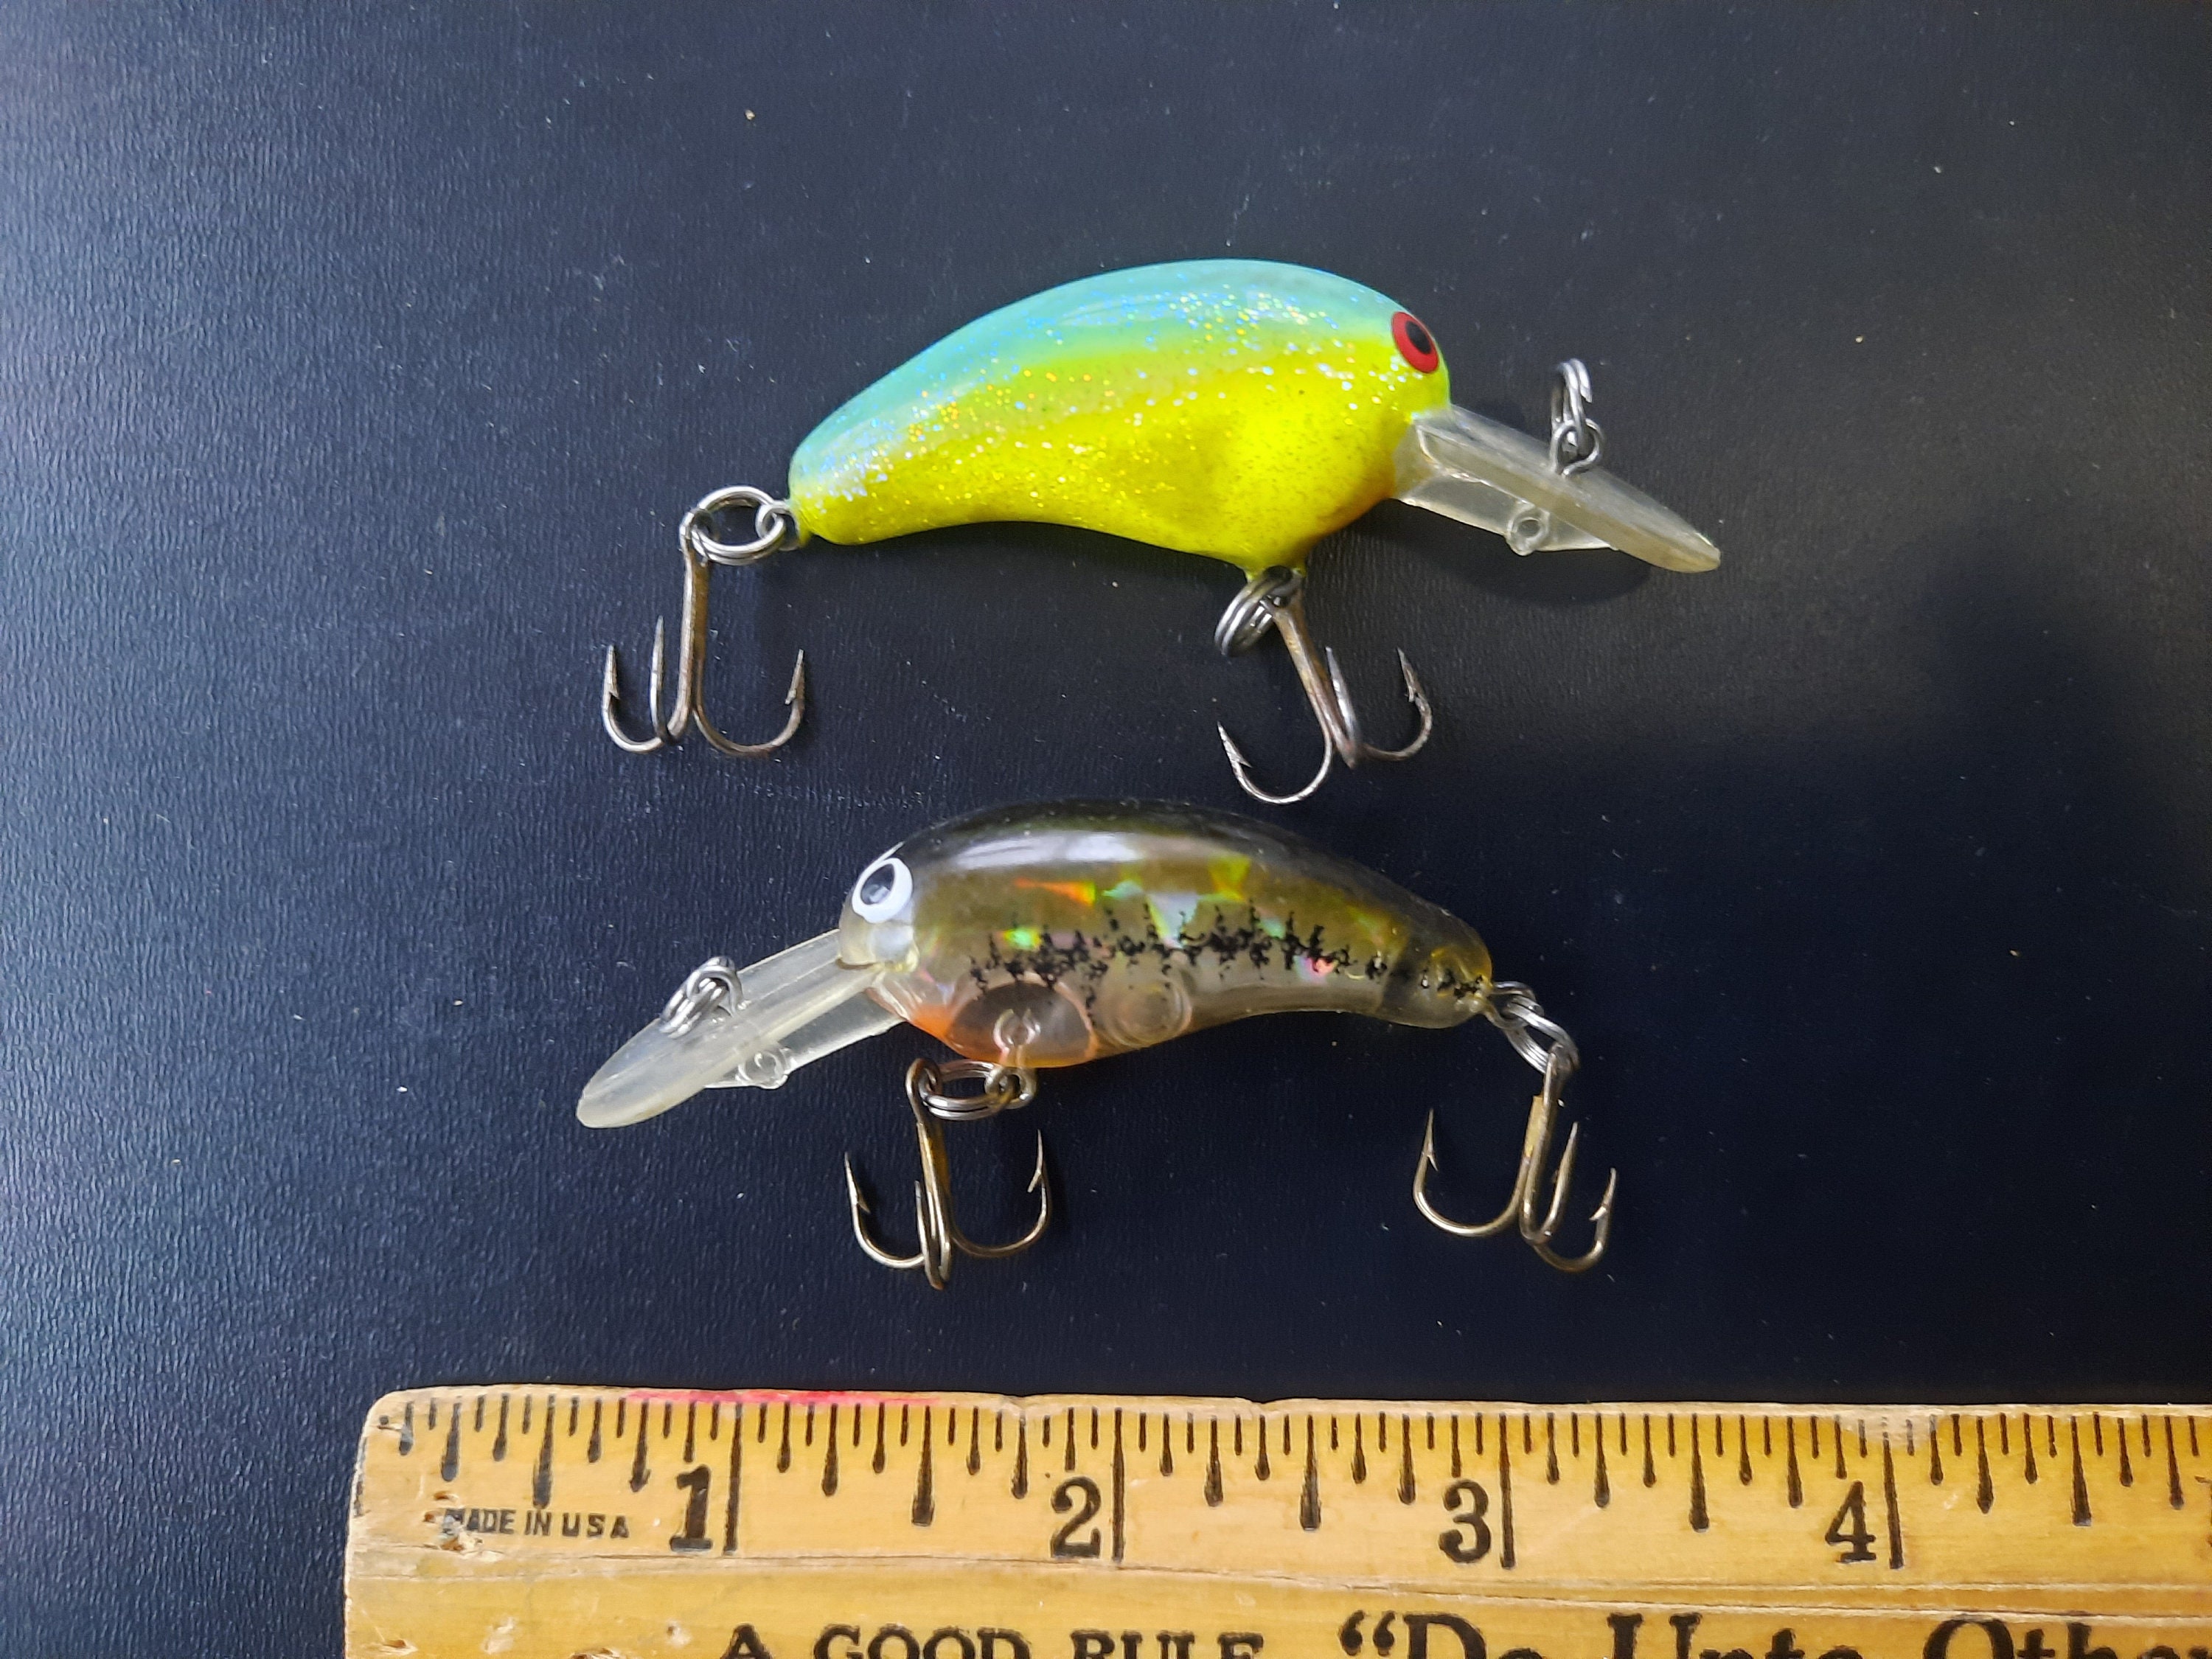 Vintage 1980s Lot of 2 Medium Diving Bass Lures: Fluorescent